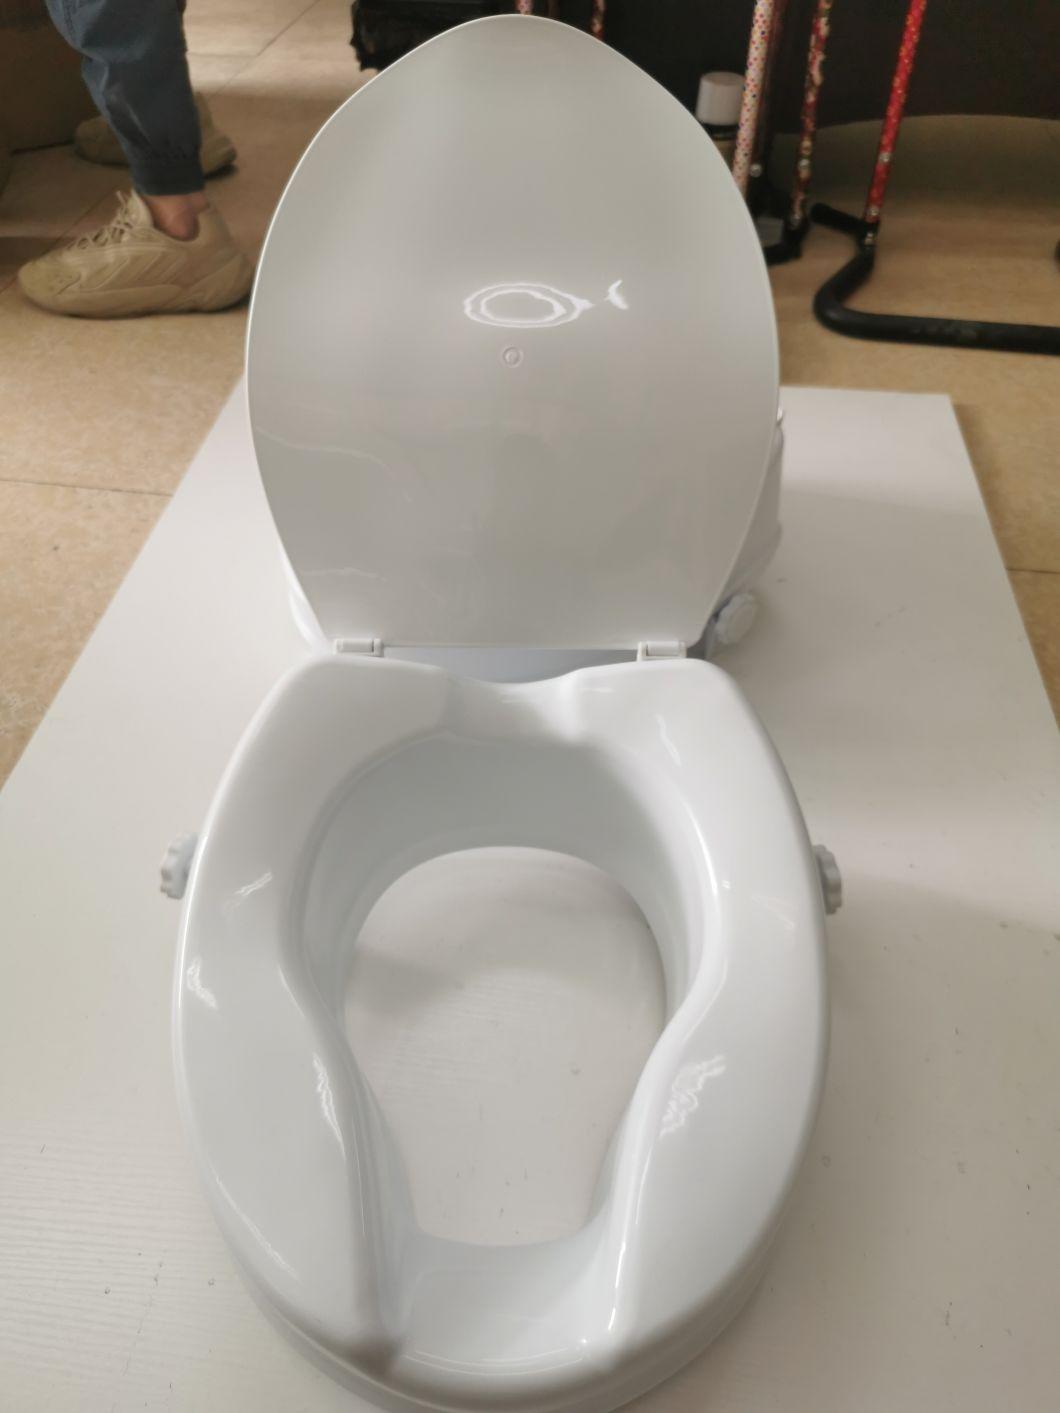 Commode Chair - Raised Toilet Seat with Lid, White, 2/4/6-Inches